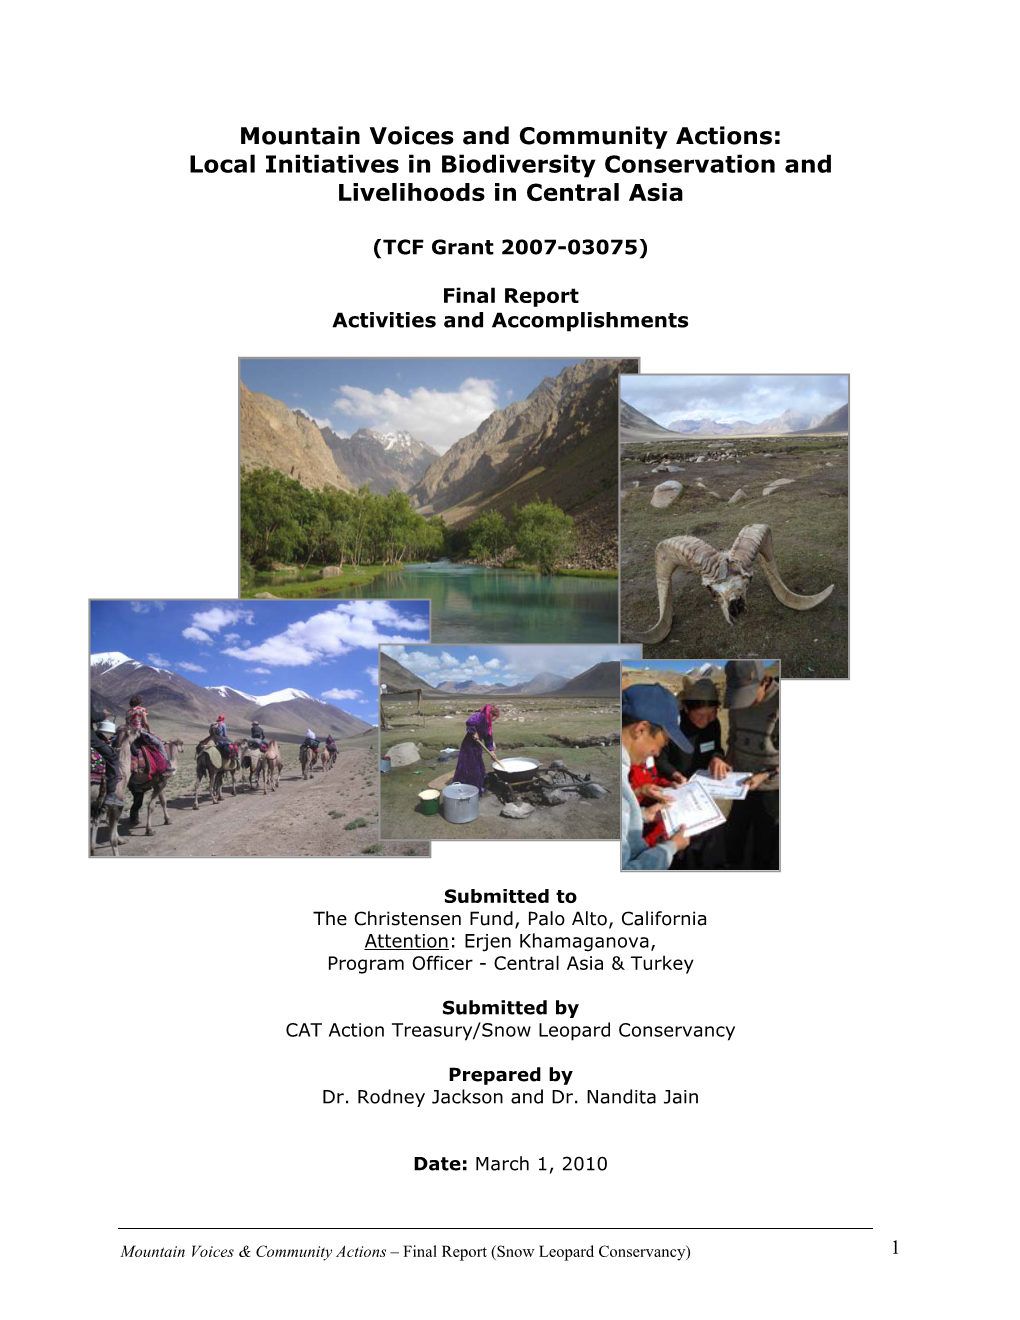 Mountain Voices and Community Actions: Local Initiatives in Biodiversity Conservation and Livelihoods in Central Asia